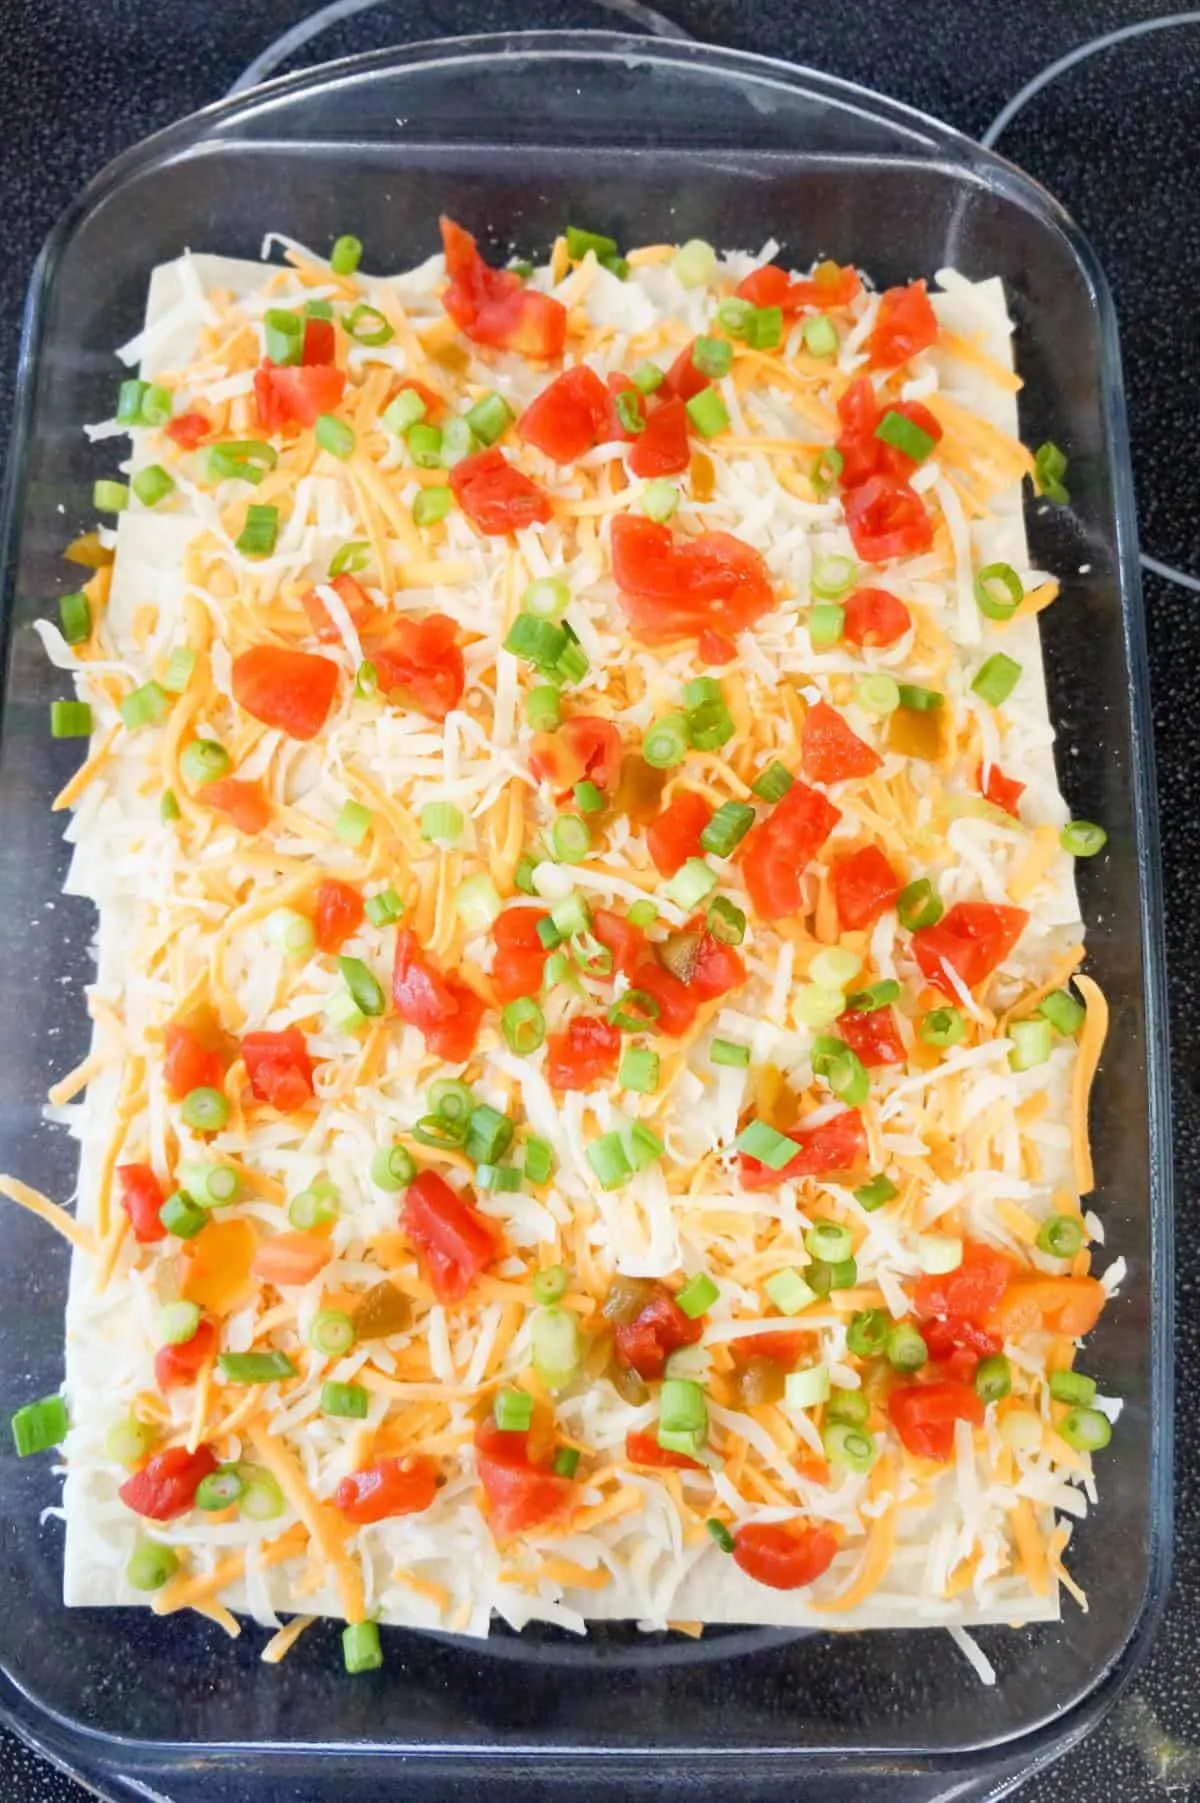 rotel, chopped green onions and shredded cheese on top of taco lasagna before baking